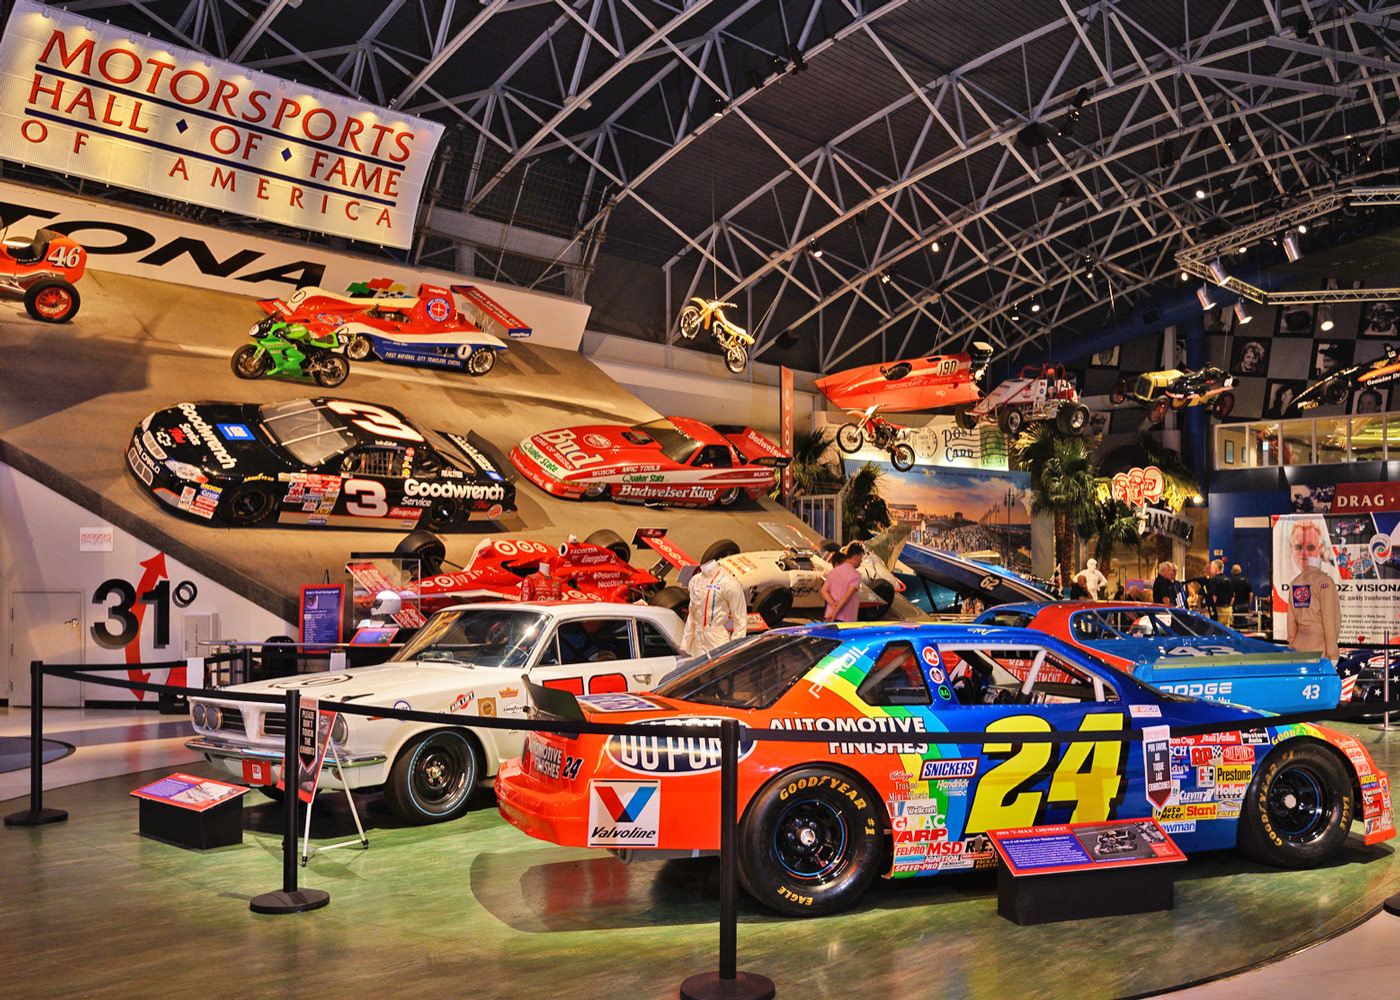 Some of the famous race cars housed at the Motorsport Hall of Fame